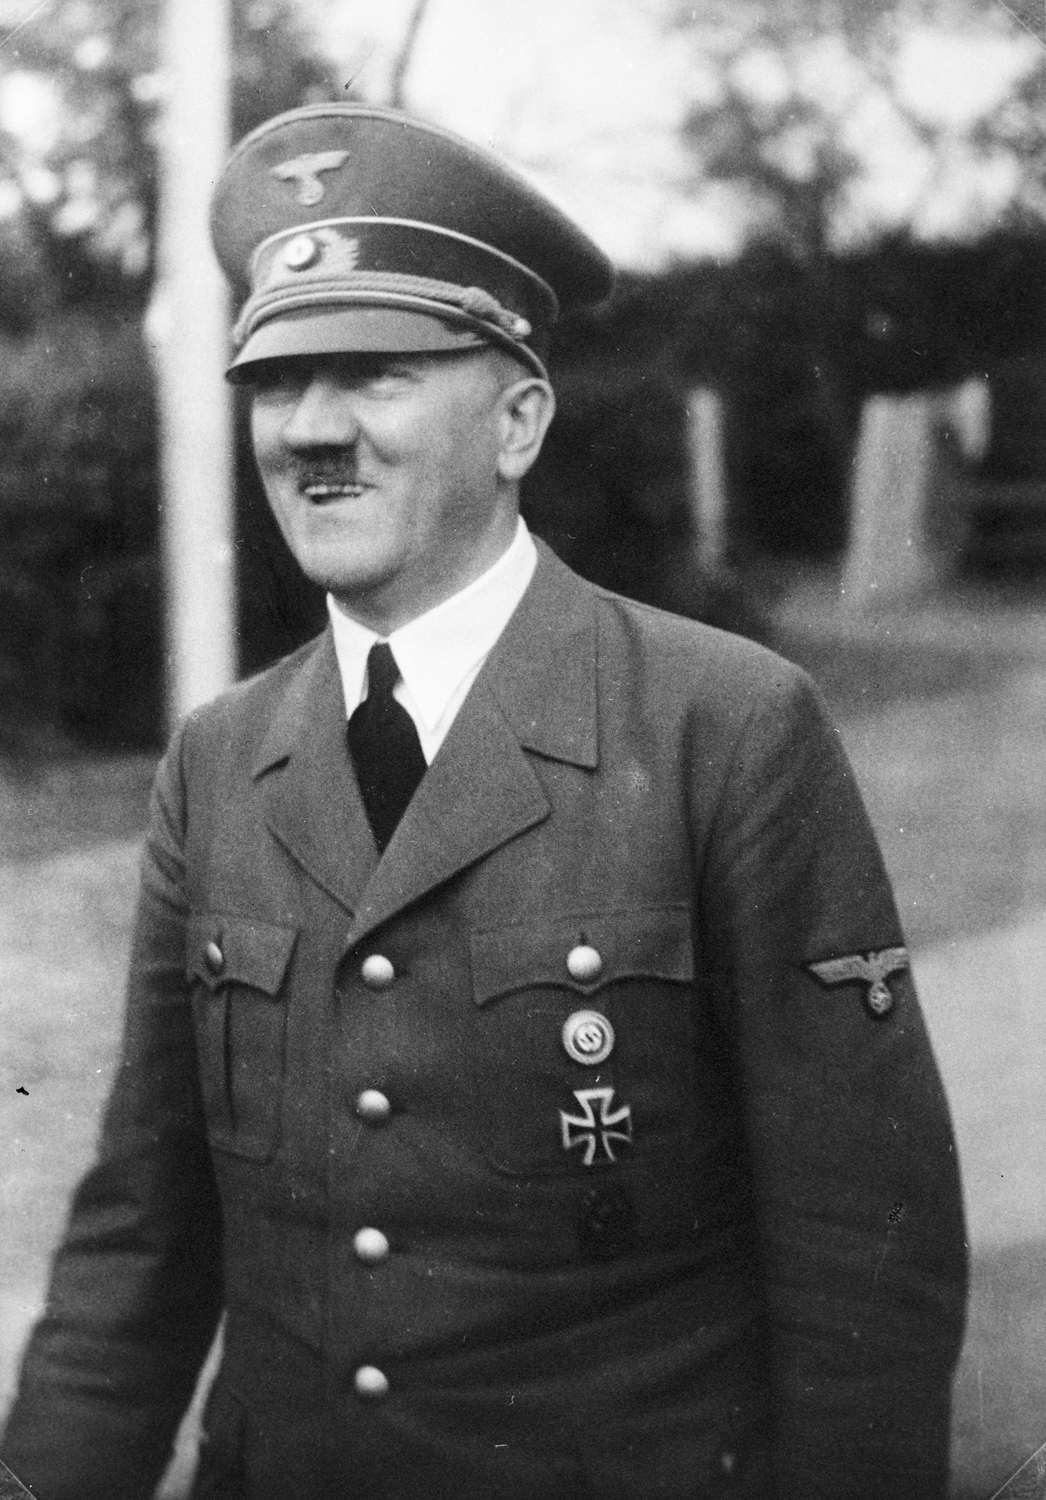 Adolf Hitler in Führerhauptquartier Wolfsschlucht at the end of the campaign against France, from Eva Braun's albums